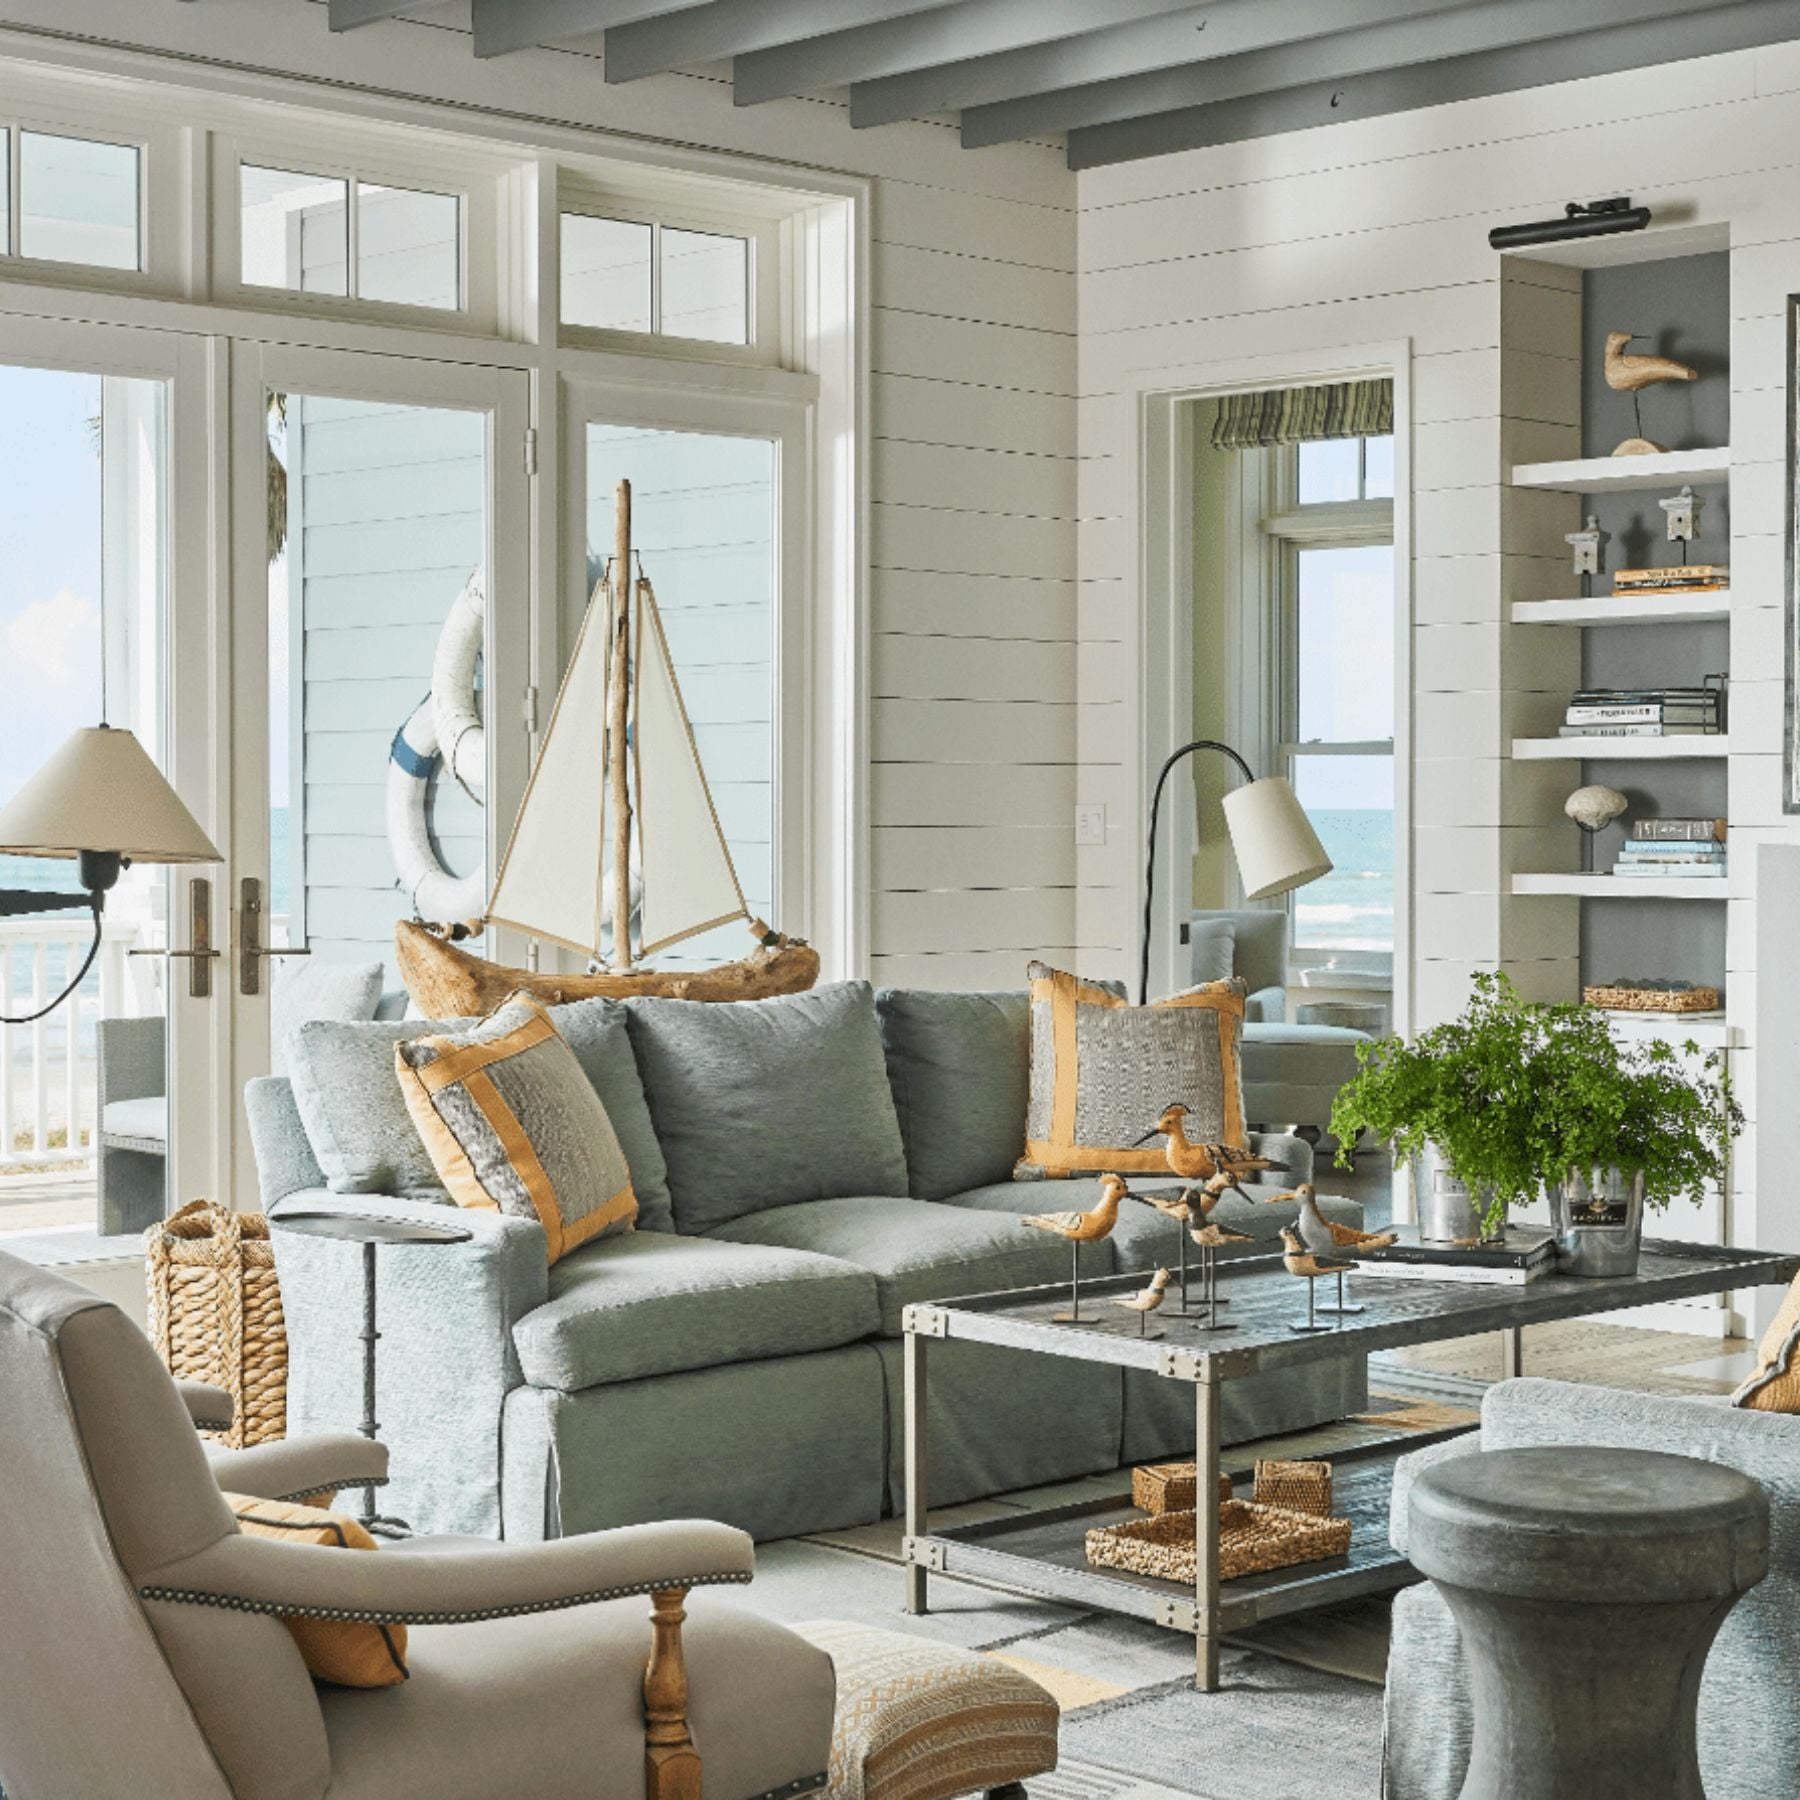 farmhouse coastal style blends the timeless charm of traditional farmhouse design with a coastal freshness that exudes charm and comfort